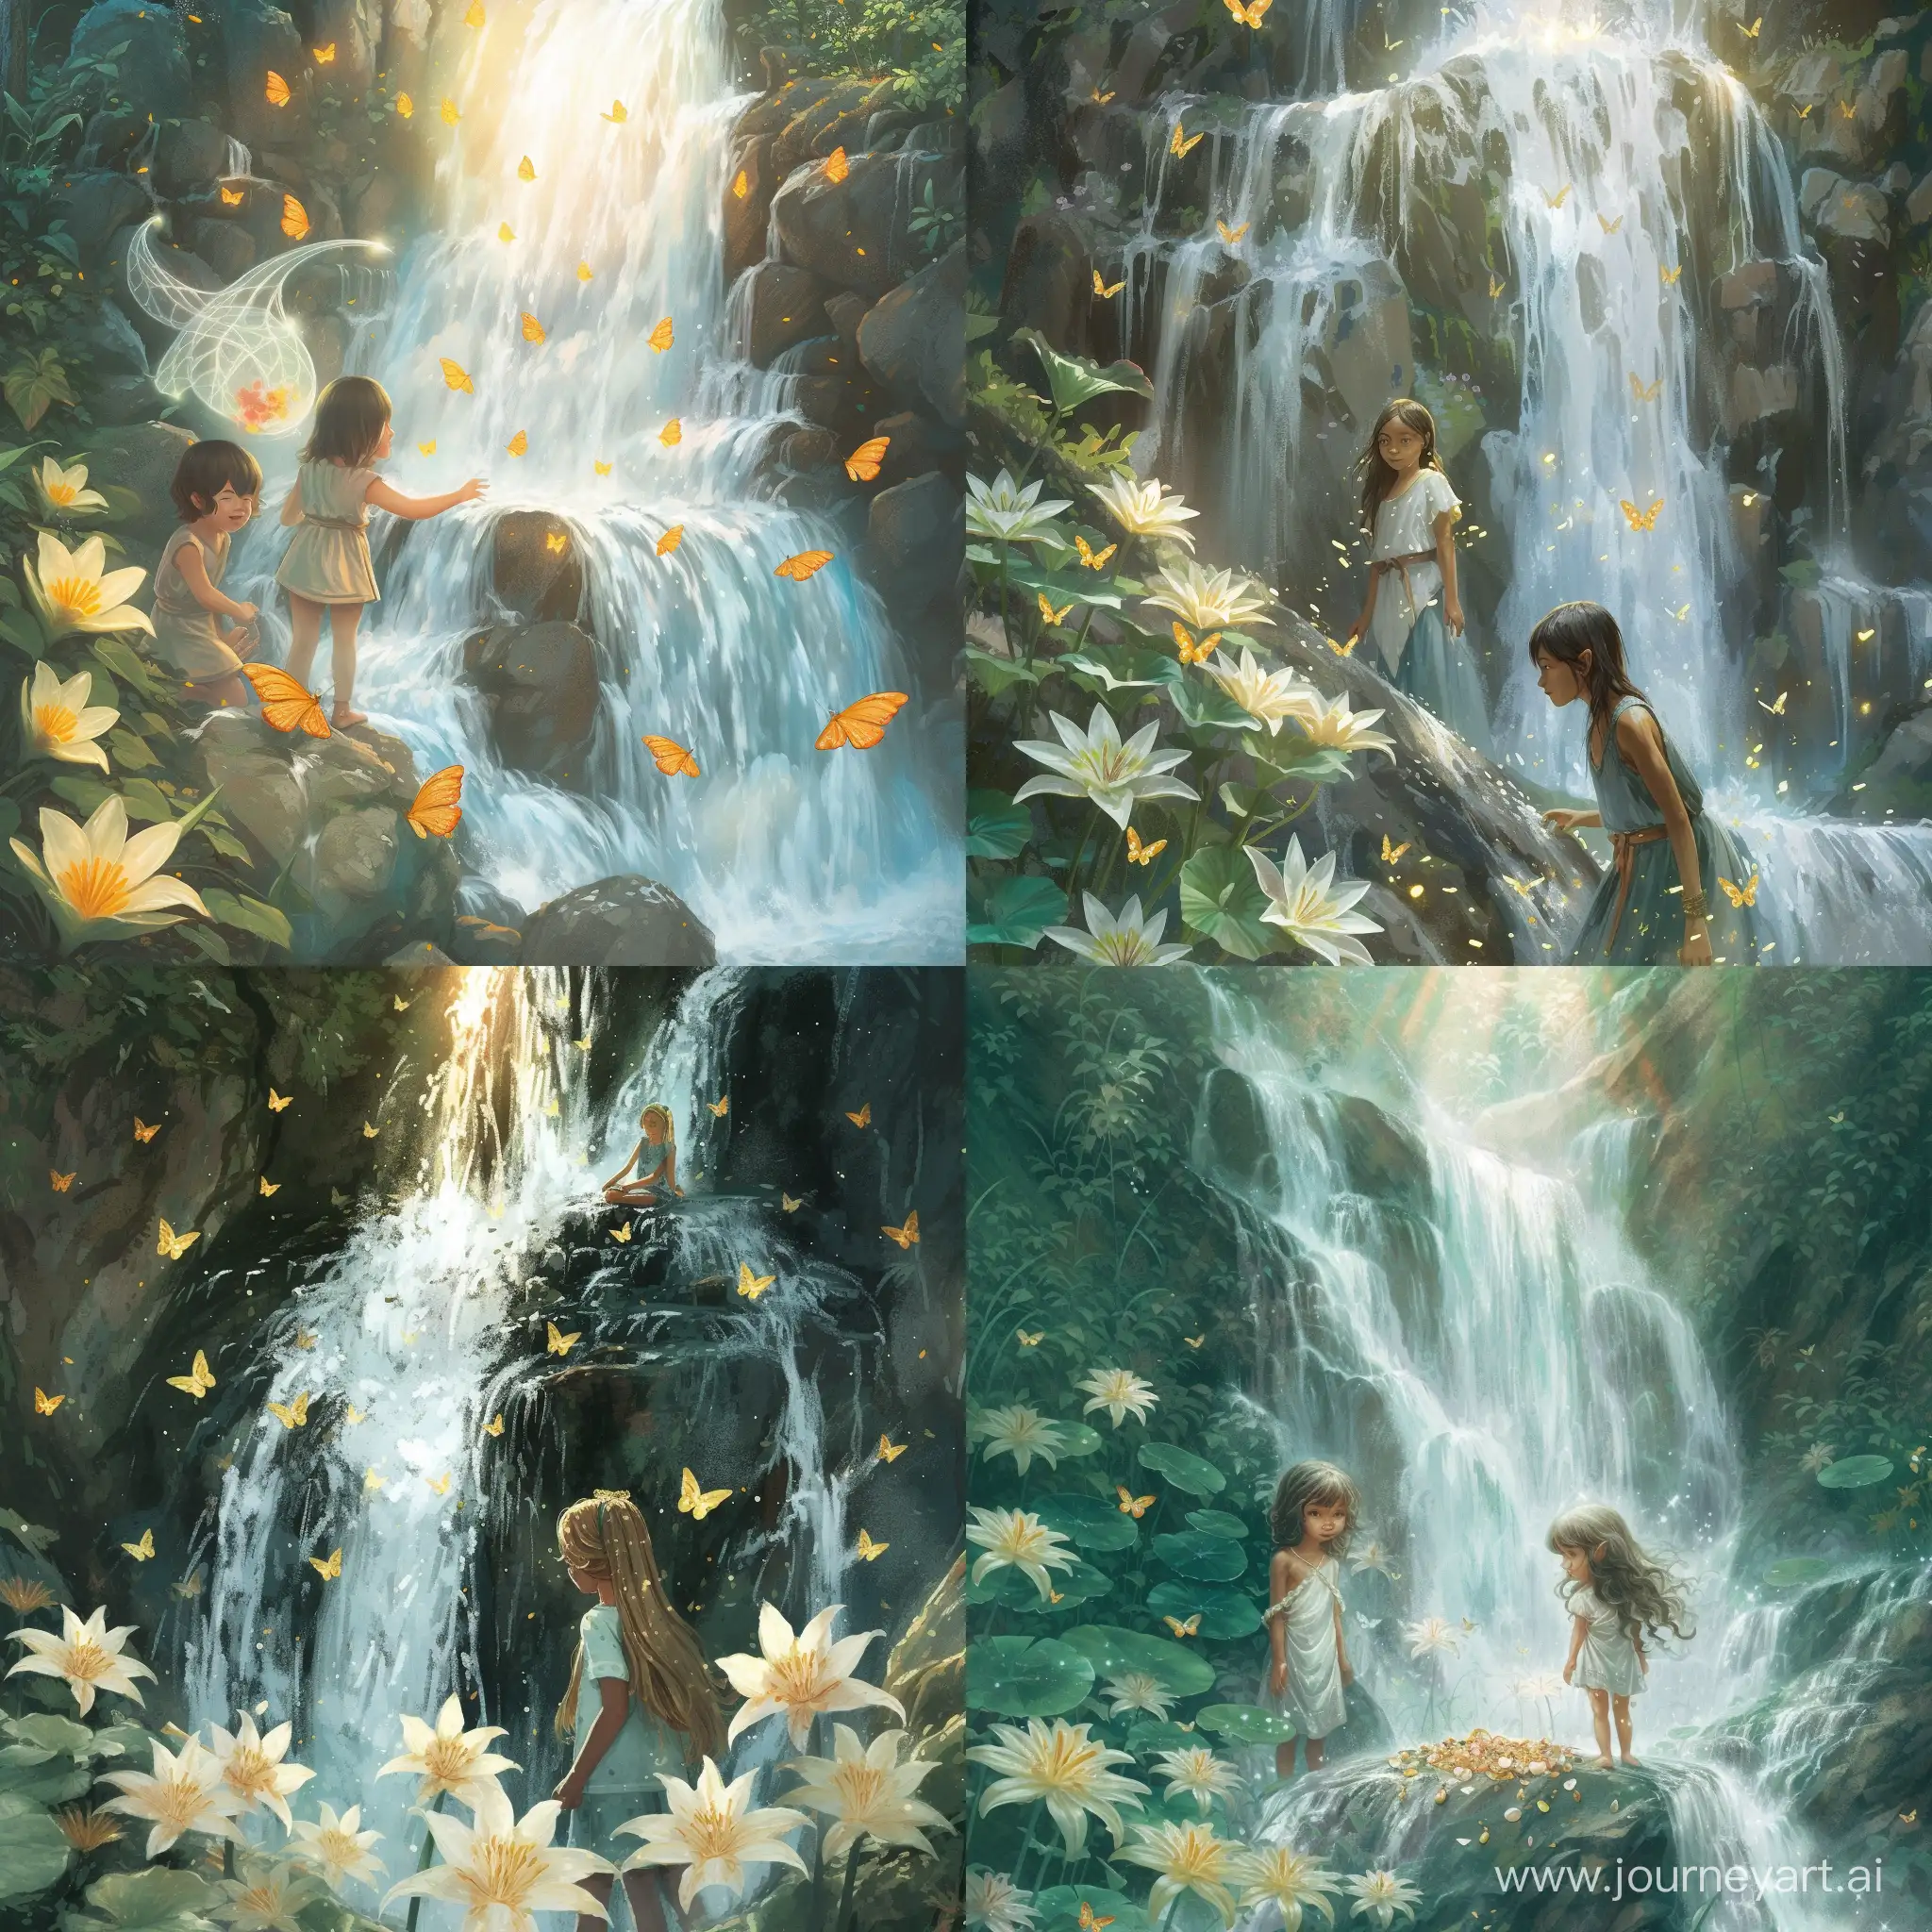 Chapter 5: Meeting with the Enchanted Nymph

Advancing further on their journey, Mira and Kostya heard the sweet whisper of the wind, leading them to a breathtaking waterfall surrounded by lilies and golden butterflies. Behind the obscuring waterfall rock, a magnificent Nymph appeared, shining with the light of the moon and permeated with untainted beauty.

The Nymph greeted the children with a smile, where wisdom and care for the Wonderland Forest radiated from every glance. She invited Mira and Kostya to share their adventures and to see the world through the prism of magic and harmony.

The encounter with the Nymph brought a new perspective to the children about the surrounding world - a world full of mysteries and beauty, harboring an inexhaustible source of wisdom and nobility. The Nymph taught Mira and Kostya to understand the language of nature, to listen to its voice, and to open their hearts to the endless magic of the worlds of living beings.

At the end of the meeting, the Nymph gifted the children amulets made of mother-of-pearl and gold, symbolizing the protection and blessing of the Forest. The children accepted these gifts with gratitude, feeling the touch of the Nymph's magic and kindness, which engraved itself in their hearts as a bright and eternal memory.

Descending down the waterfall, Mira and Kostya continued their journey, filled with new inspiration, strength, and understanding that they were not alone on this amazing path into the increasingly mysterious Wonderland Forest.

Thus, the meeting with the Enchanted Nymph became another important step for Mira and Kostya, revealing new facets of magic and wisdom in this wondrous world of adventures. --v 6 --ar 1:1 --no 4283